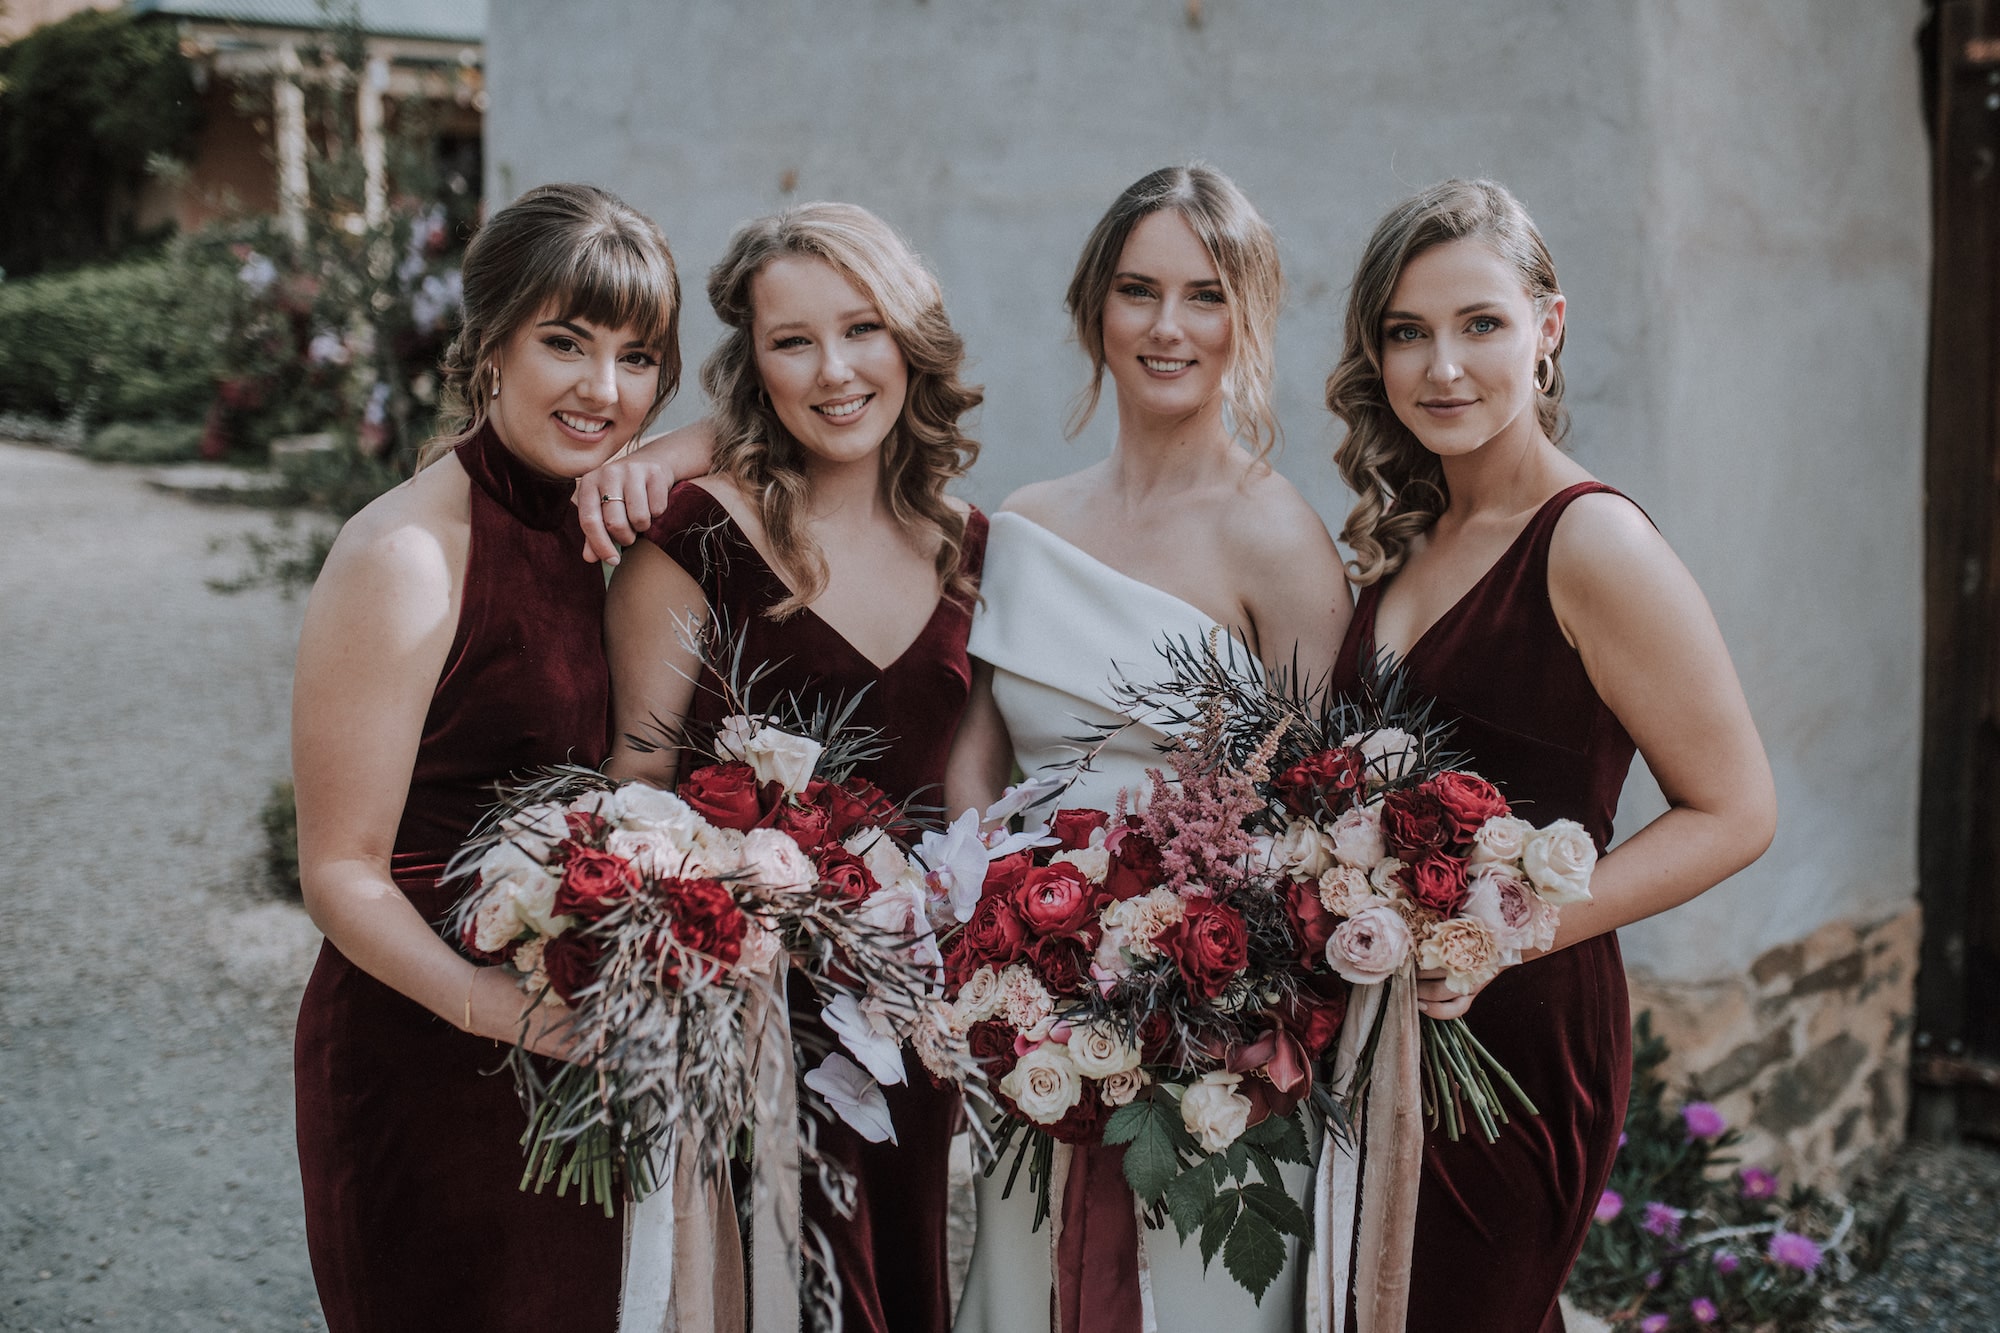 Landscape shot of bride and bridesmaids. Bridesmaids are also wearing 3 different red velvet gowns.